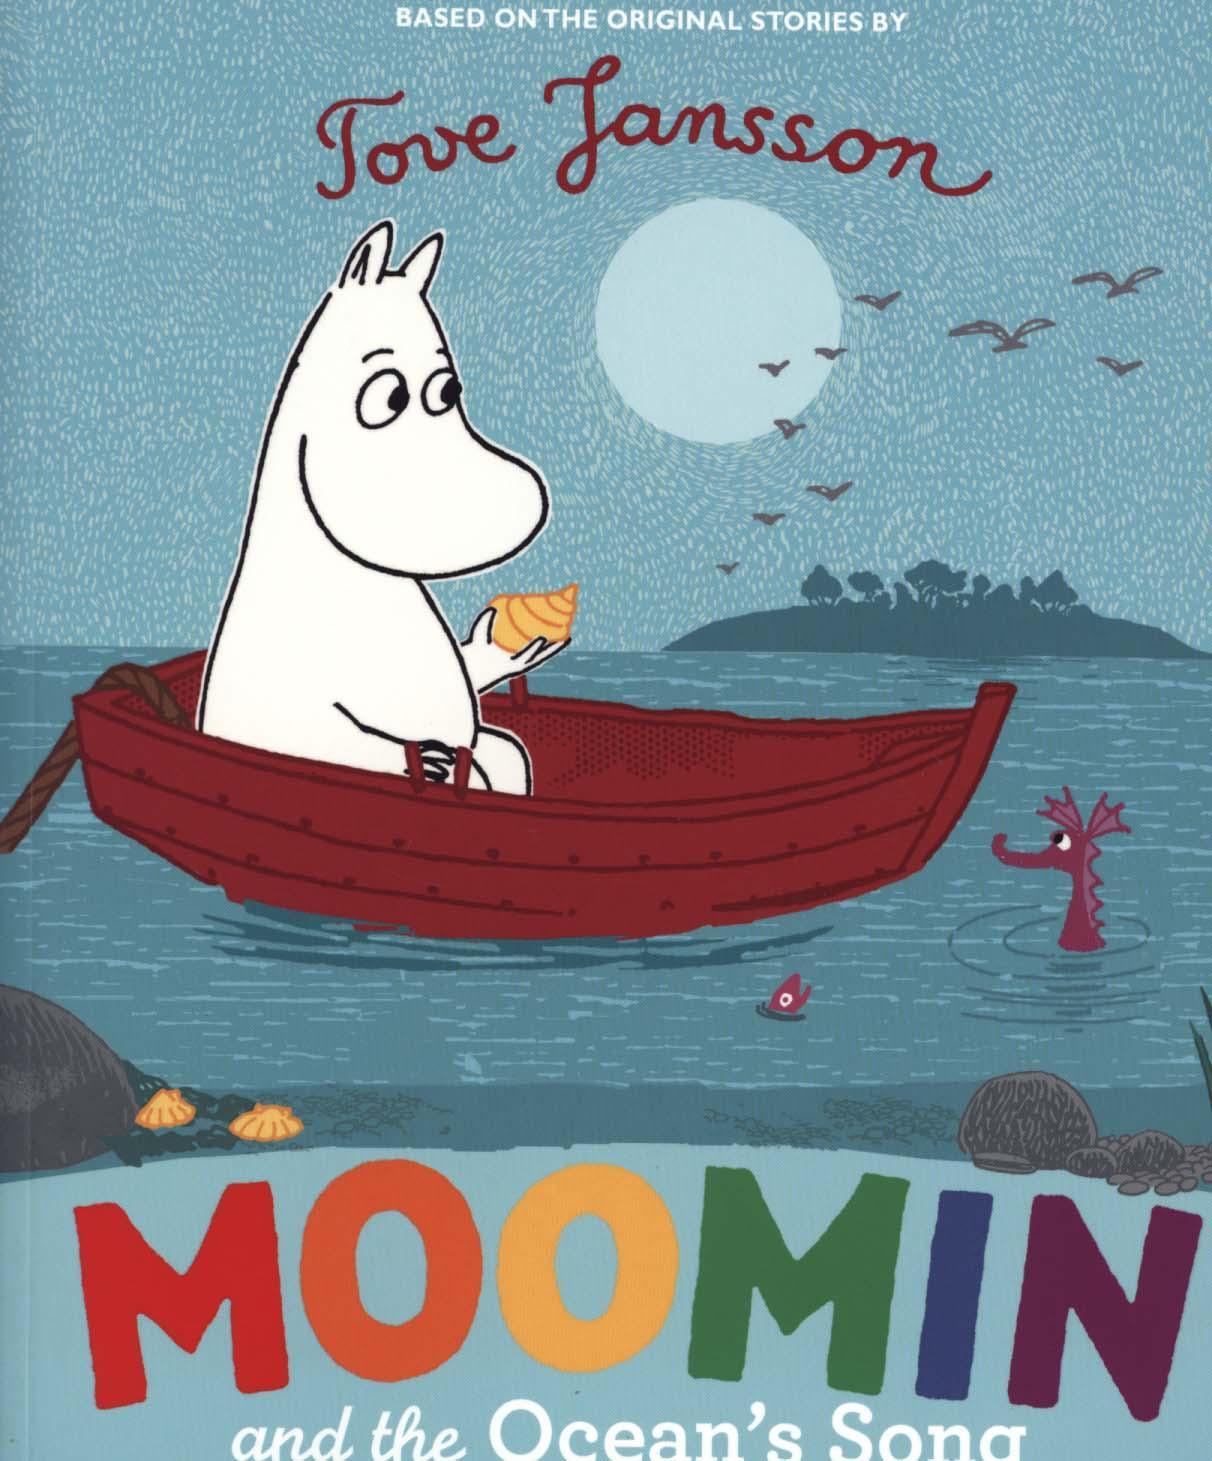 Moomin and the Ocean's Song - Tove Jansson